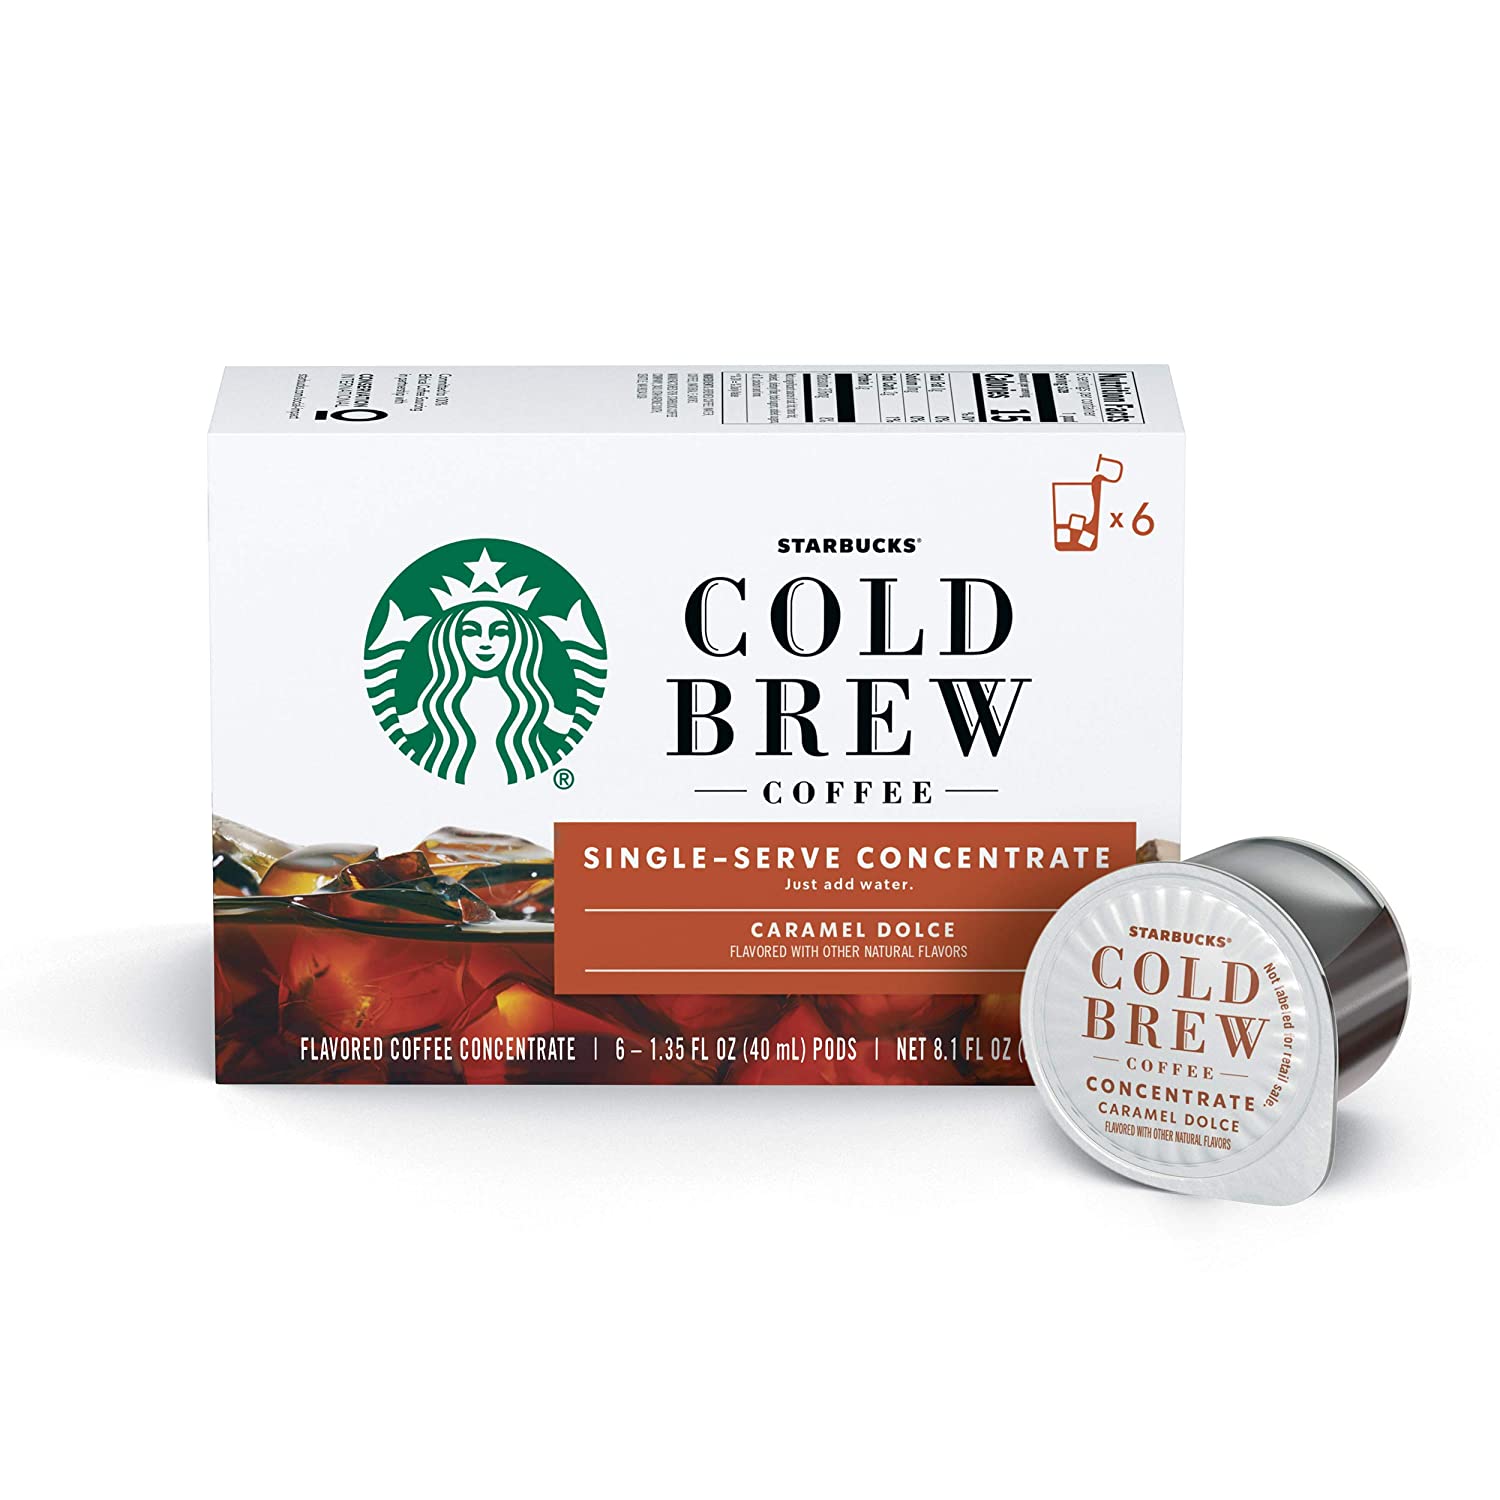 https://discounttoday.net/wp-content/uploads/2023/03/Starbucks-Cold-Brew-Coffee-Caramel-Dolce-Flavored-Single-Serve-Coffee-Concentrate-Pods-6-Count-Pack-of-6.jpg